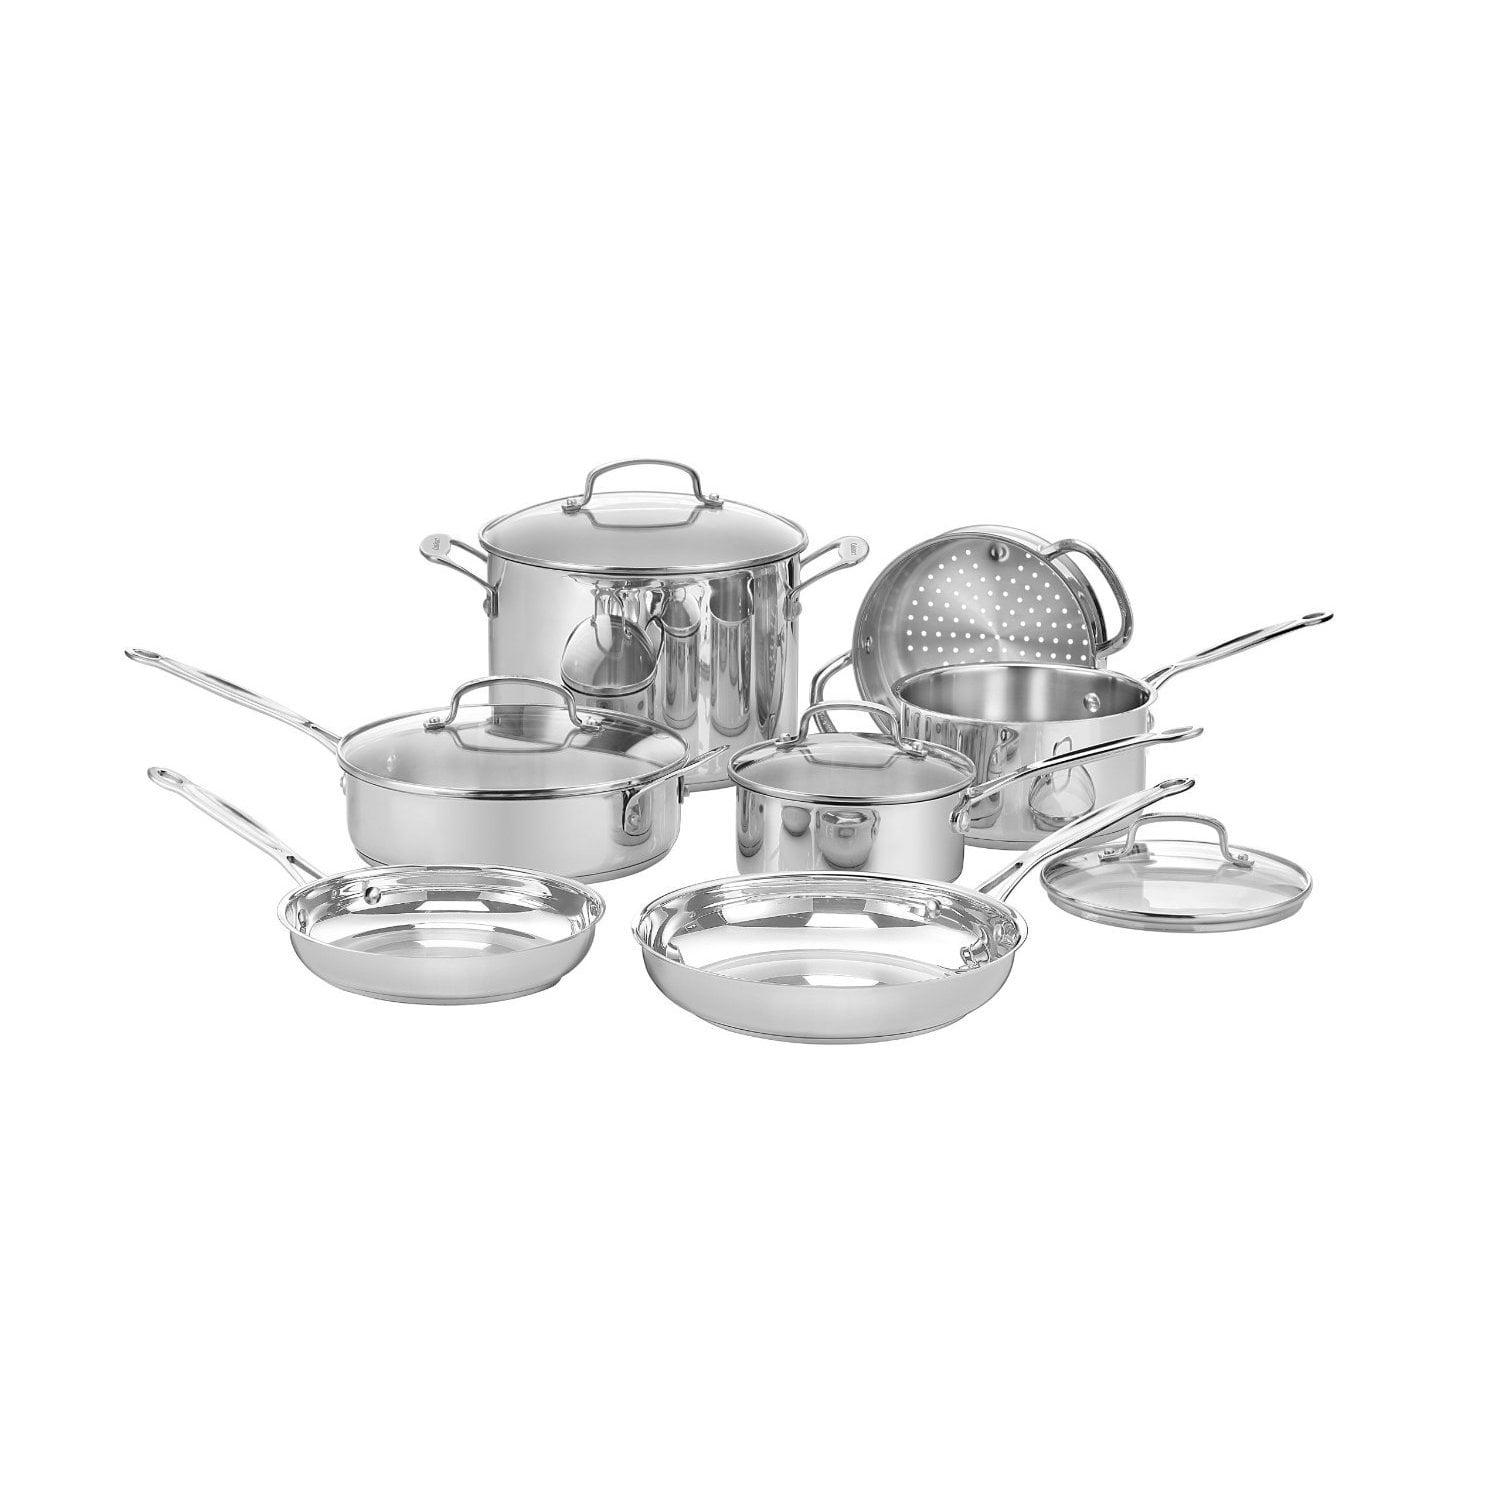 Cuisinart Chef's 11 Piece Classic Stainless Steel Cookware Set, Silver